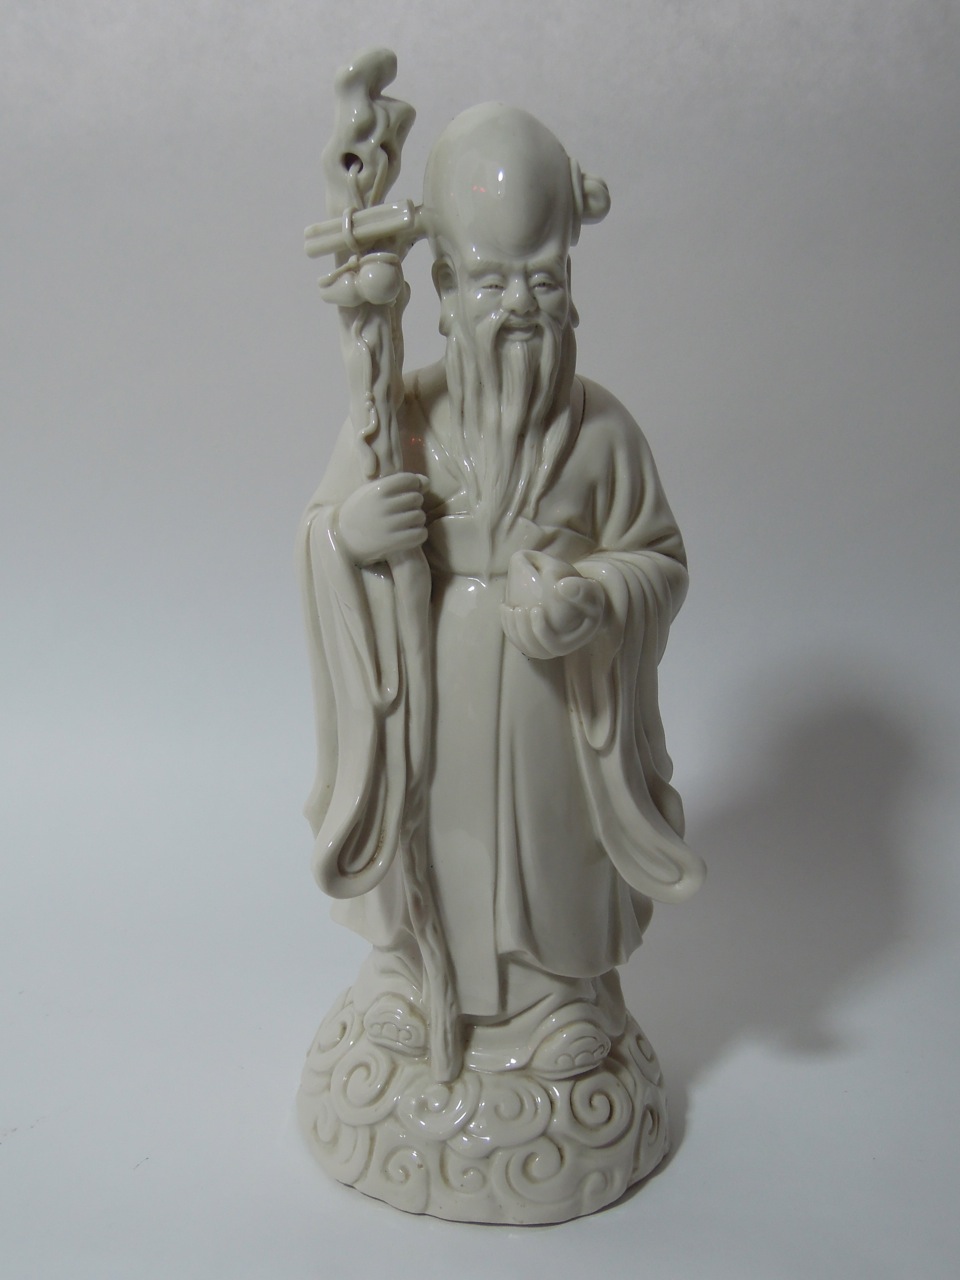 A 20th century Chinese figure of Shou-lao, the ancient Chinese Taoist God of long life and luck,